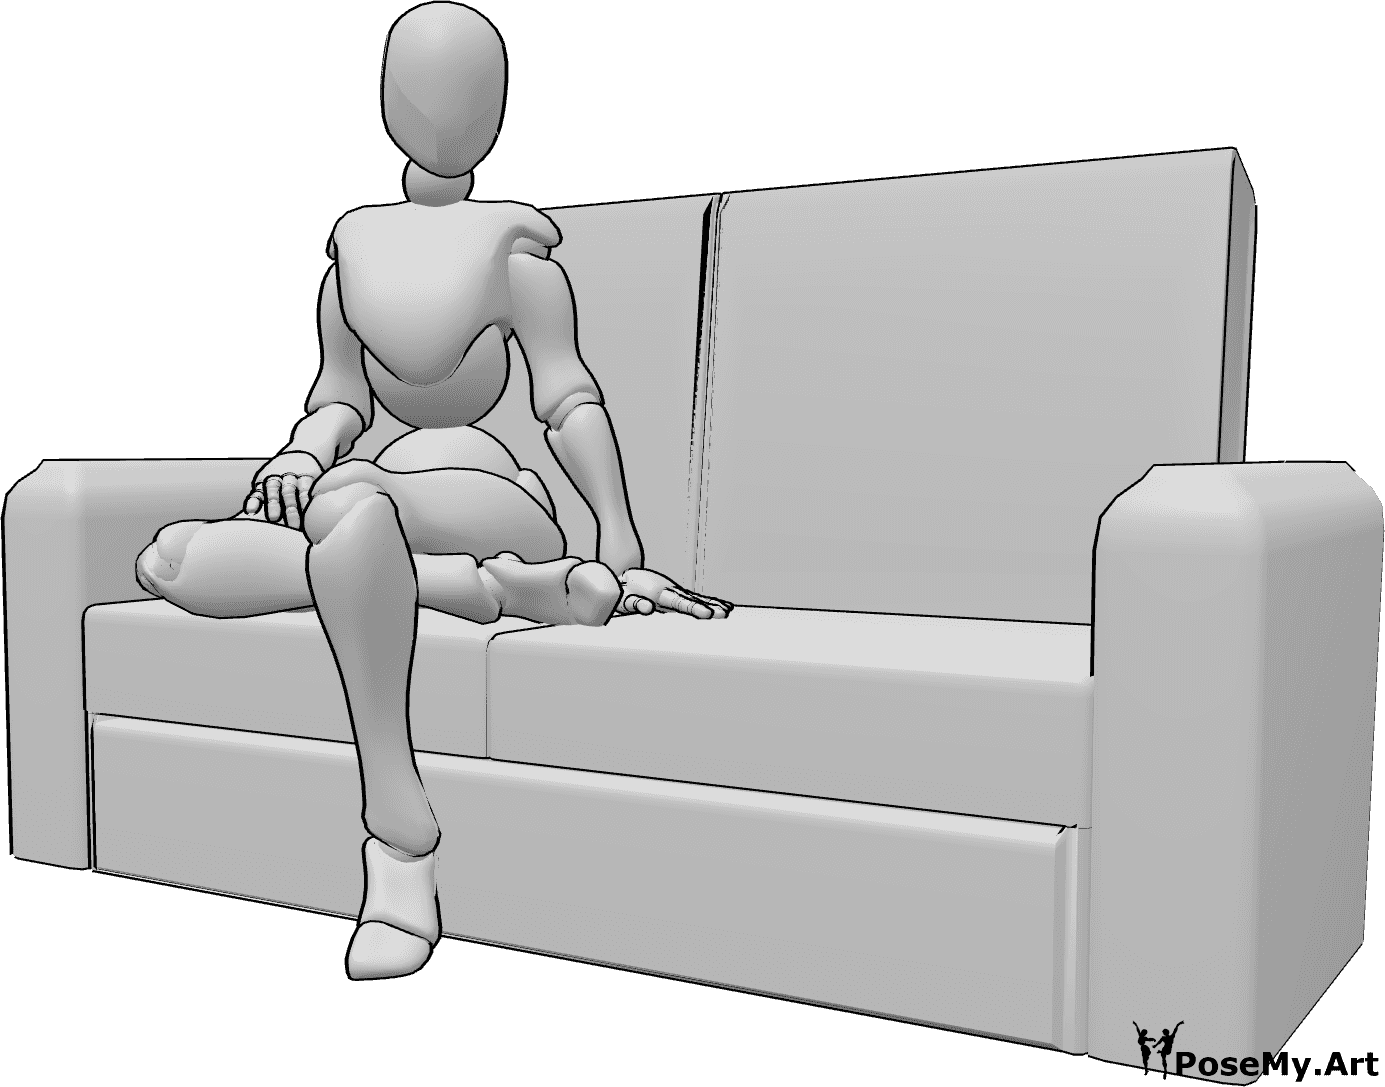 Pose Reference - Sitting sofa casual pose - Female is sitting casually on the sofa